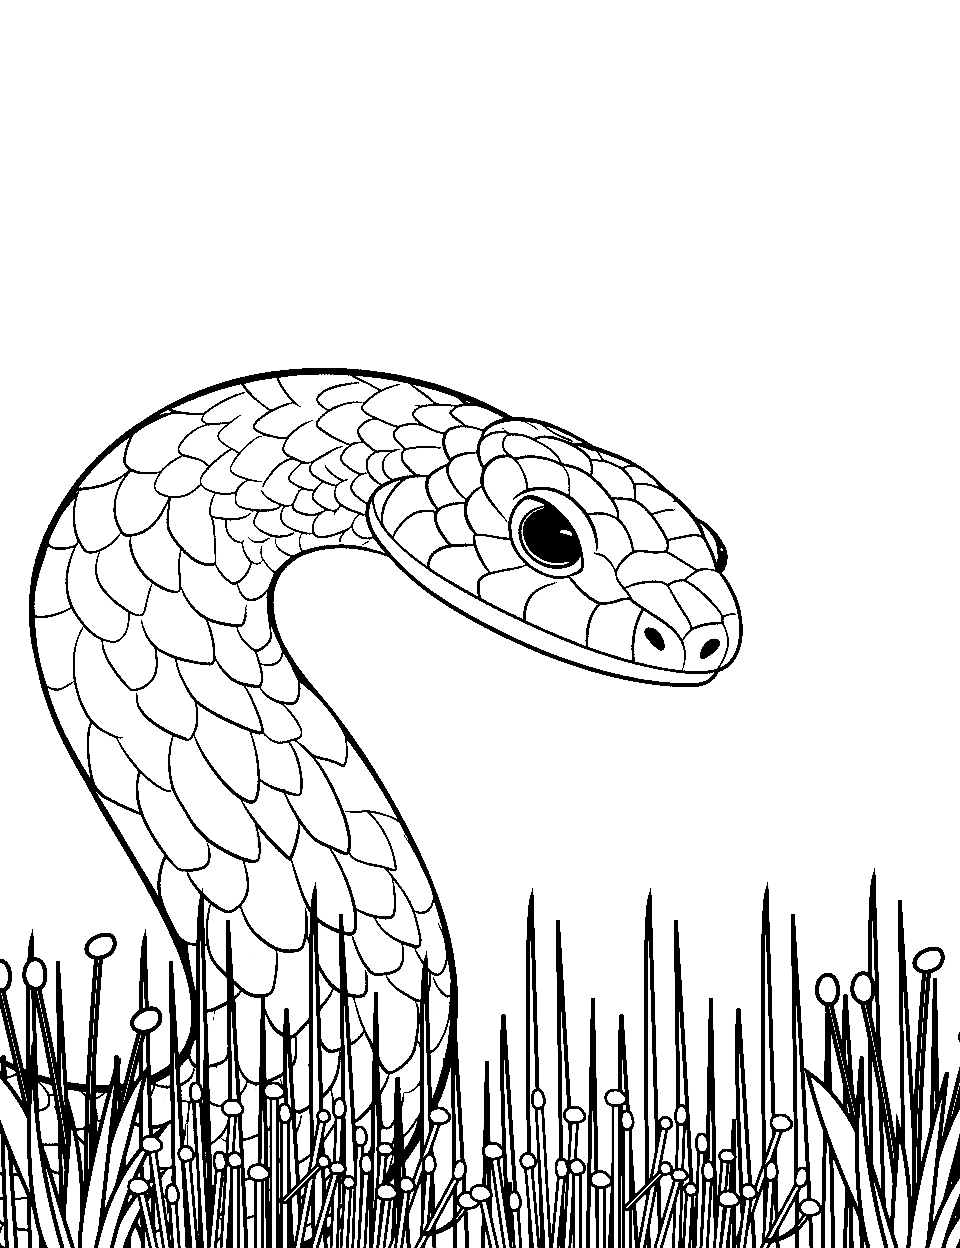 Sneaky Snake Coloring Page - A sneaky snake moving through grass.